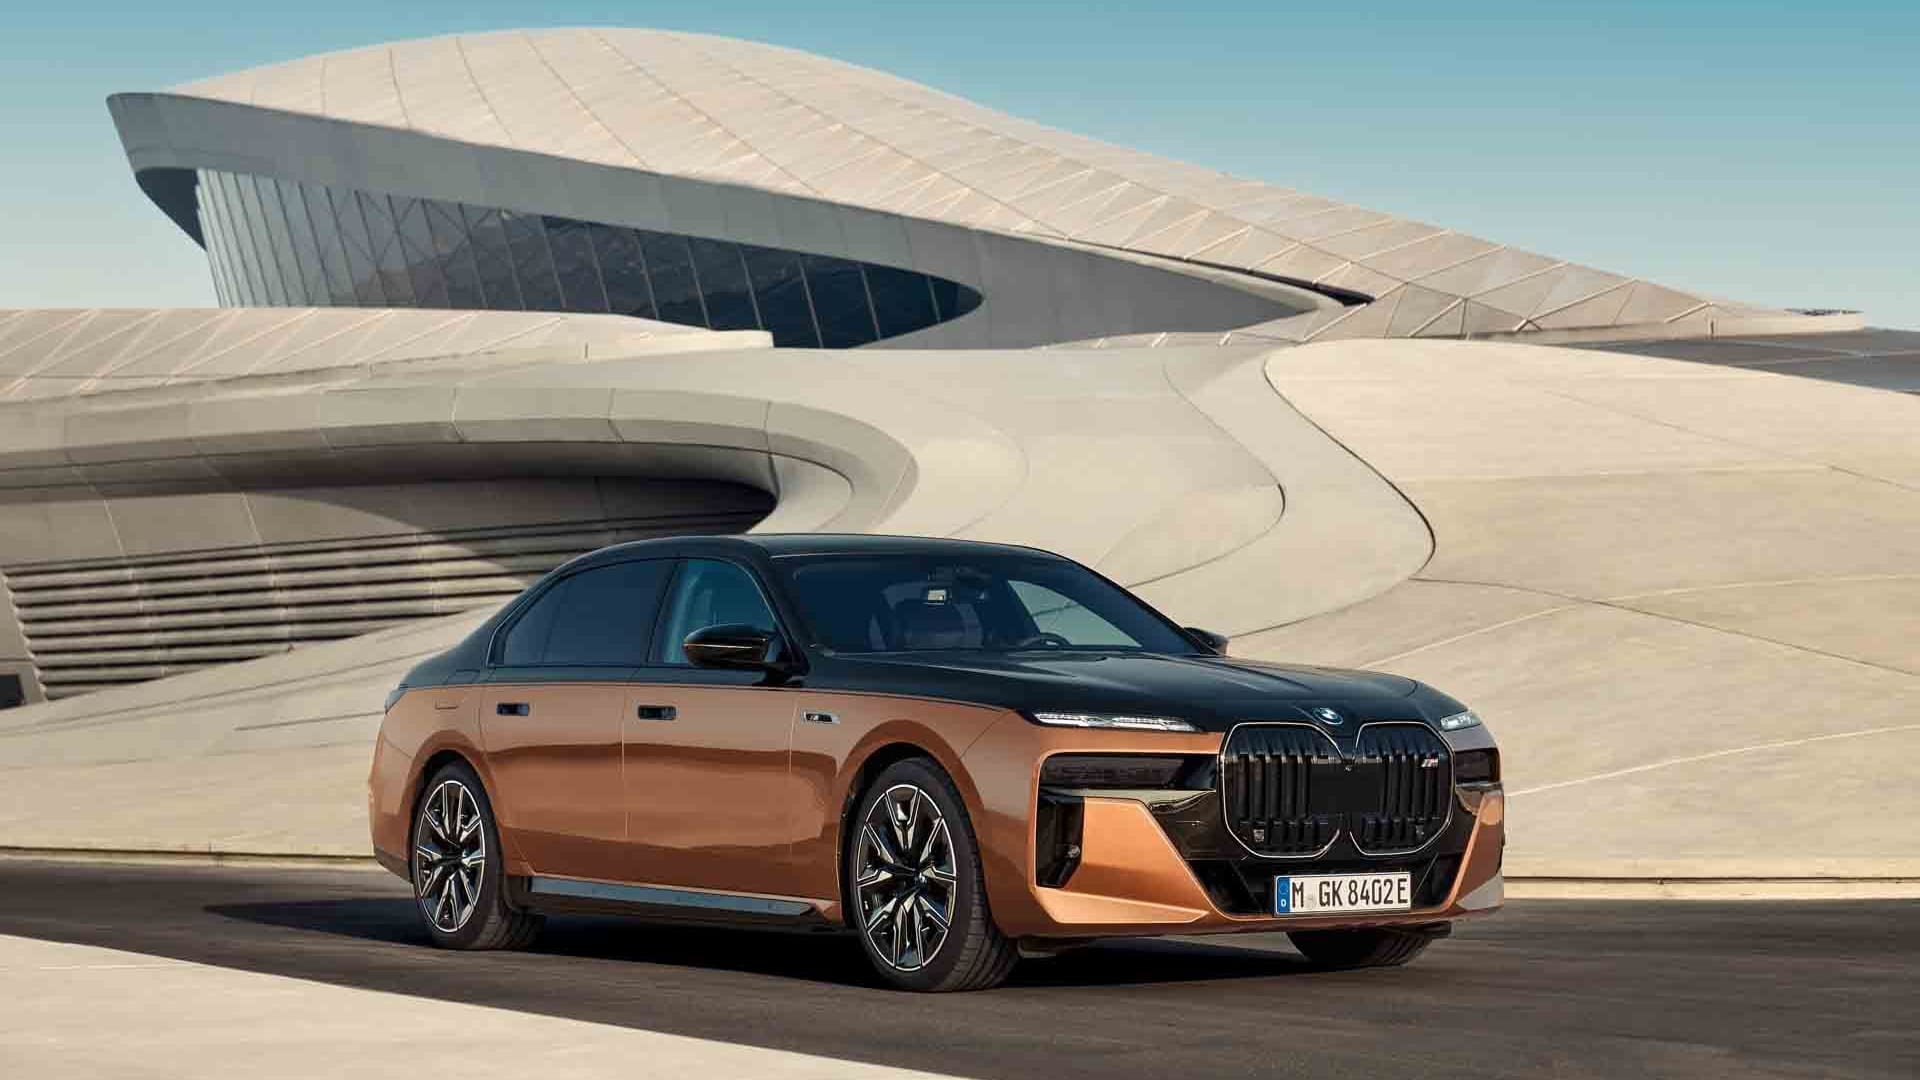 2015 BMW 7-Series Individual Final Edition To Debut At 2014 Paris Auto Show